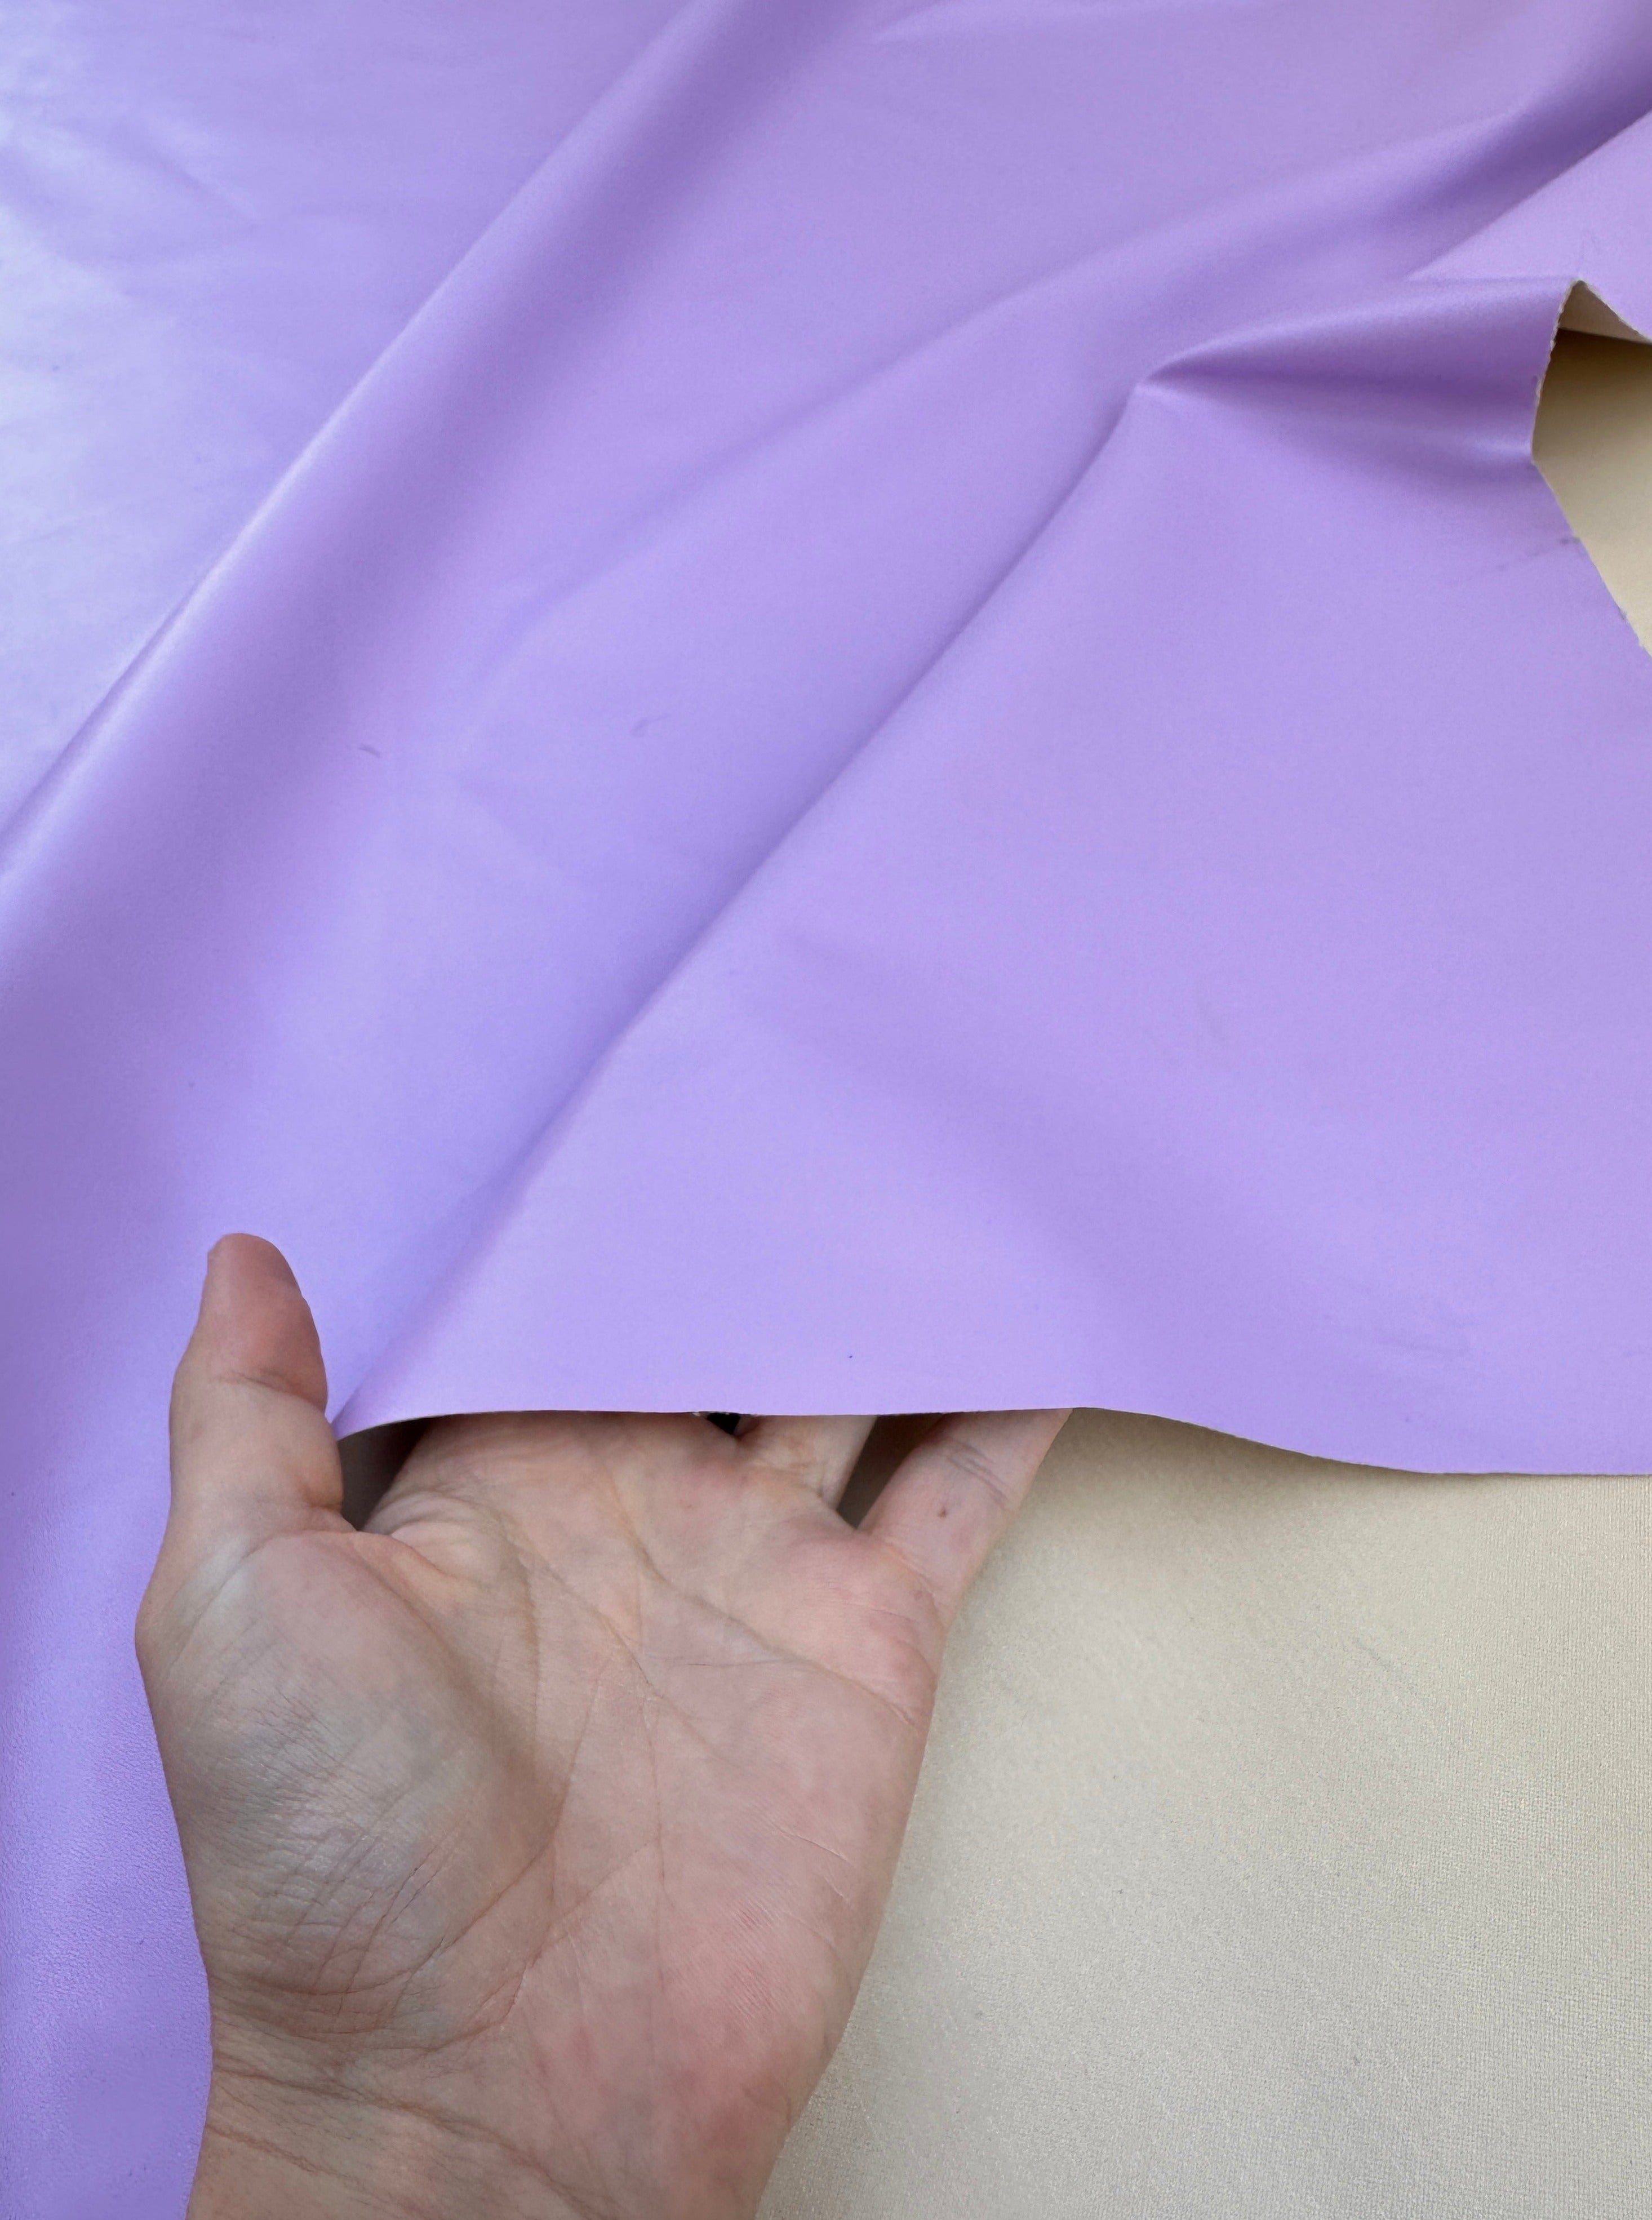 lavender stretch faux leather, stretch faux leather on sale, stretch faux leather on discount, stretch faux leather for woman,stretch faux leather for brazzer, purple stretch faux leather, light purple stretch faux leather, stretch faux leather for winter, stretch faux leather on demand, premium quality stretch faux leather